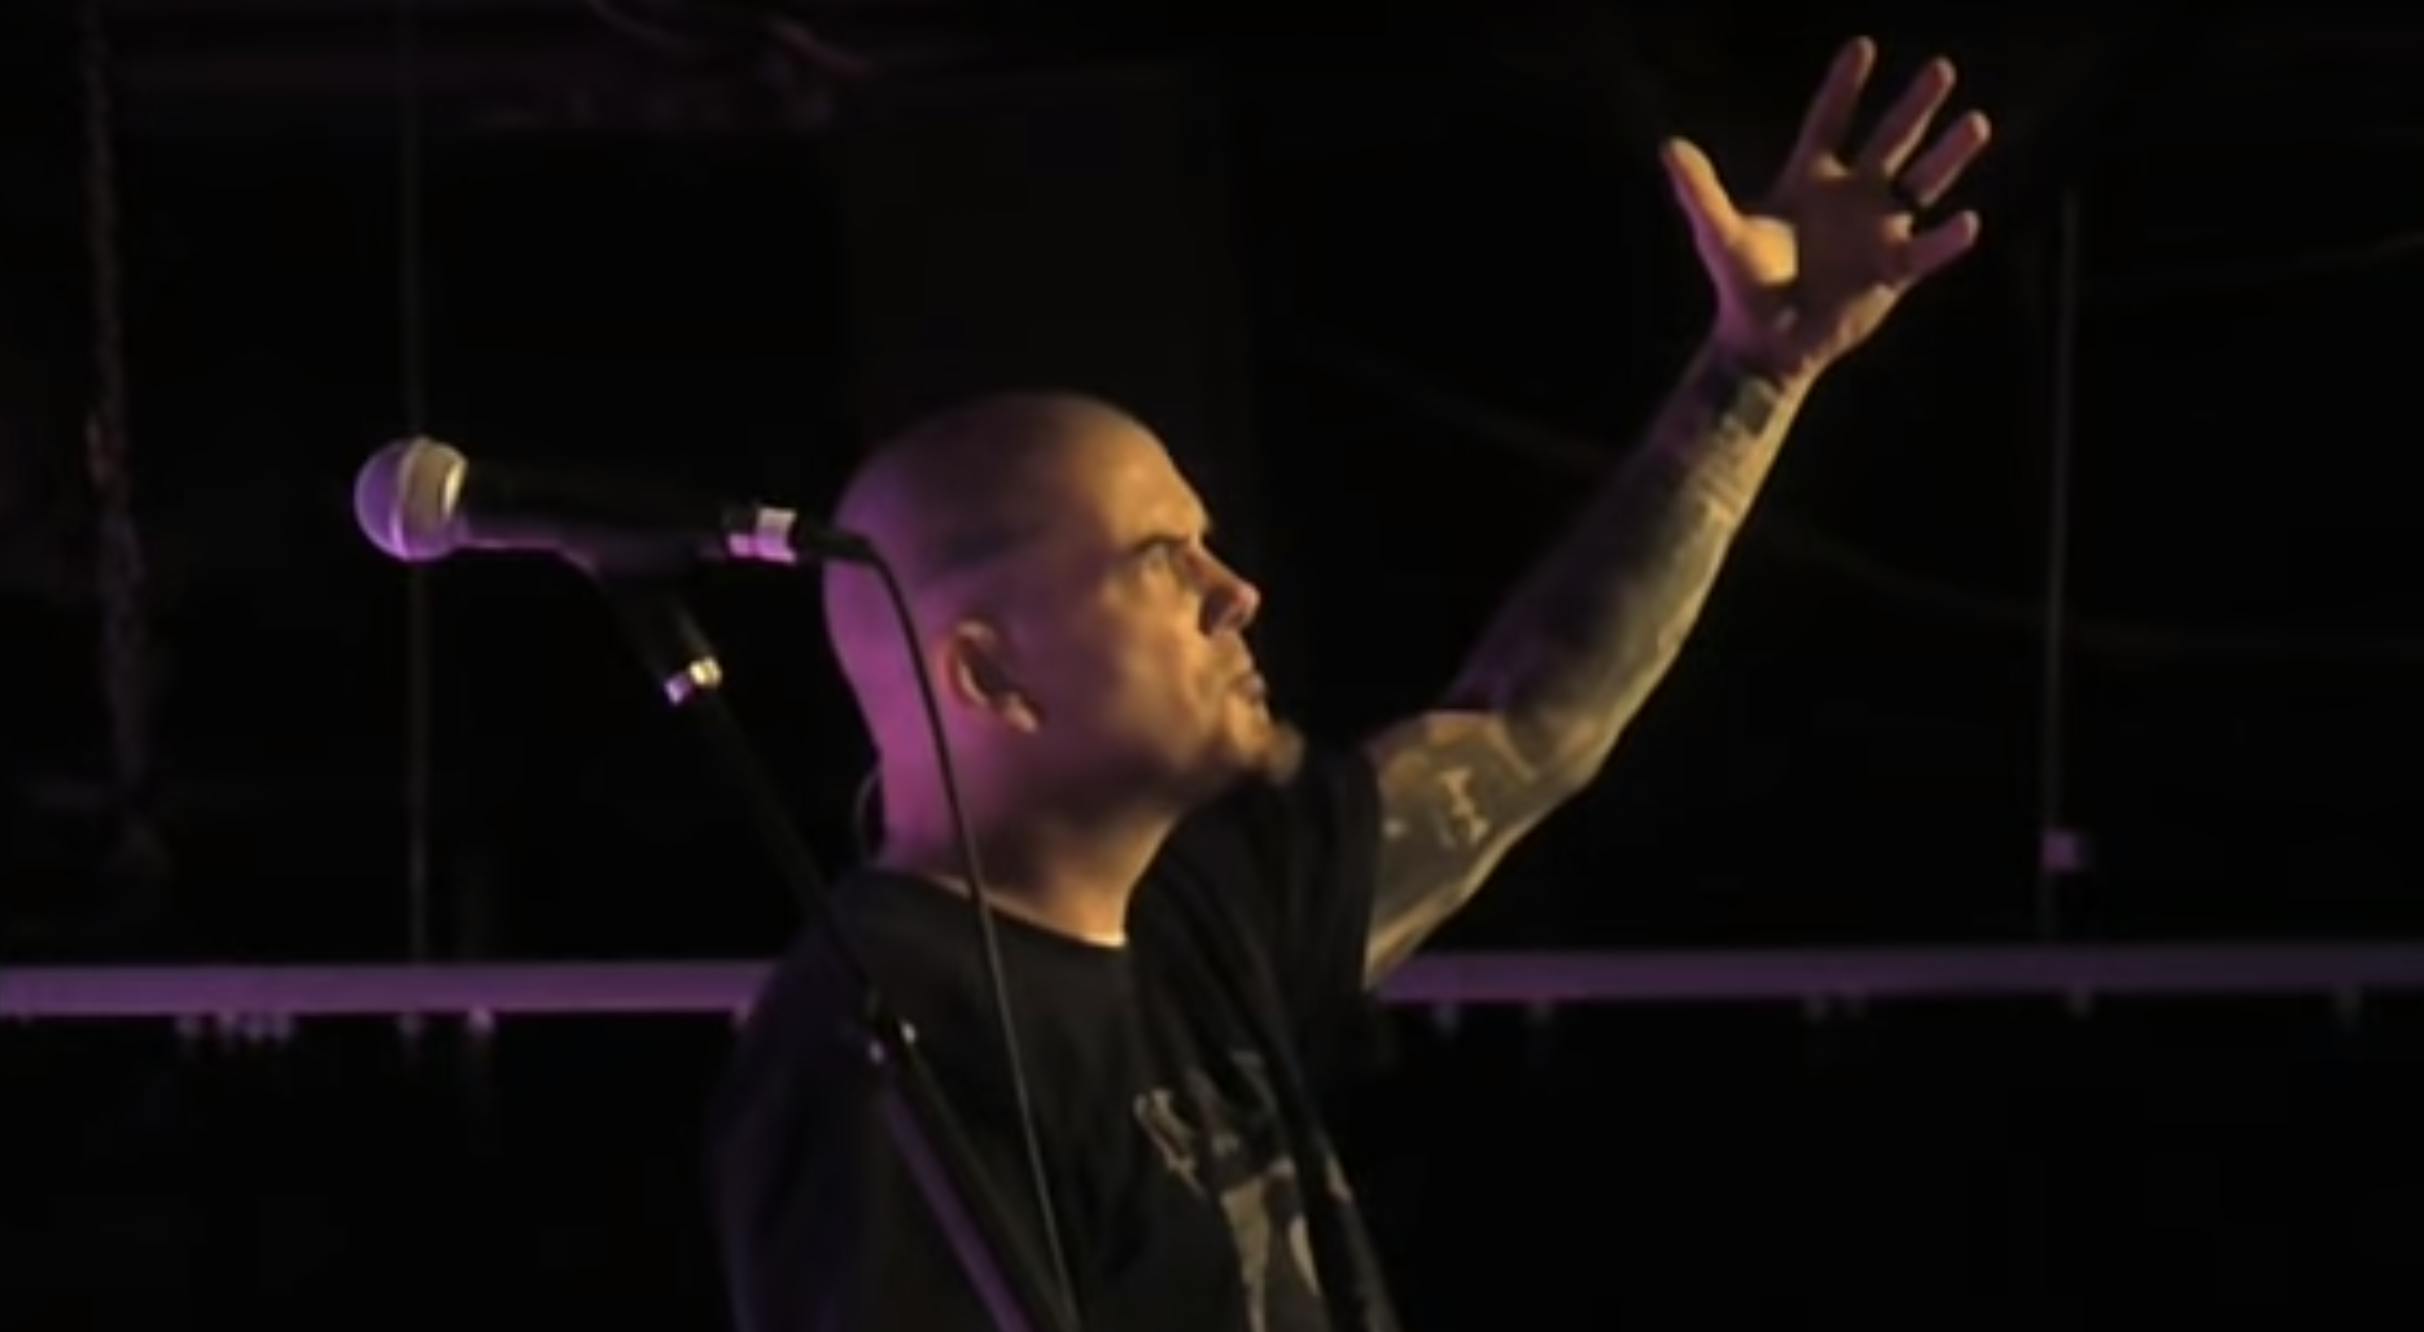 Phil Anselmo Dedicates A Cover Of Pantera's Slaughtered To Vinnie Paul